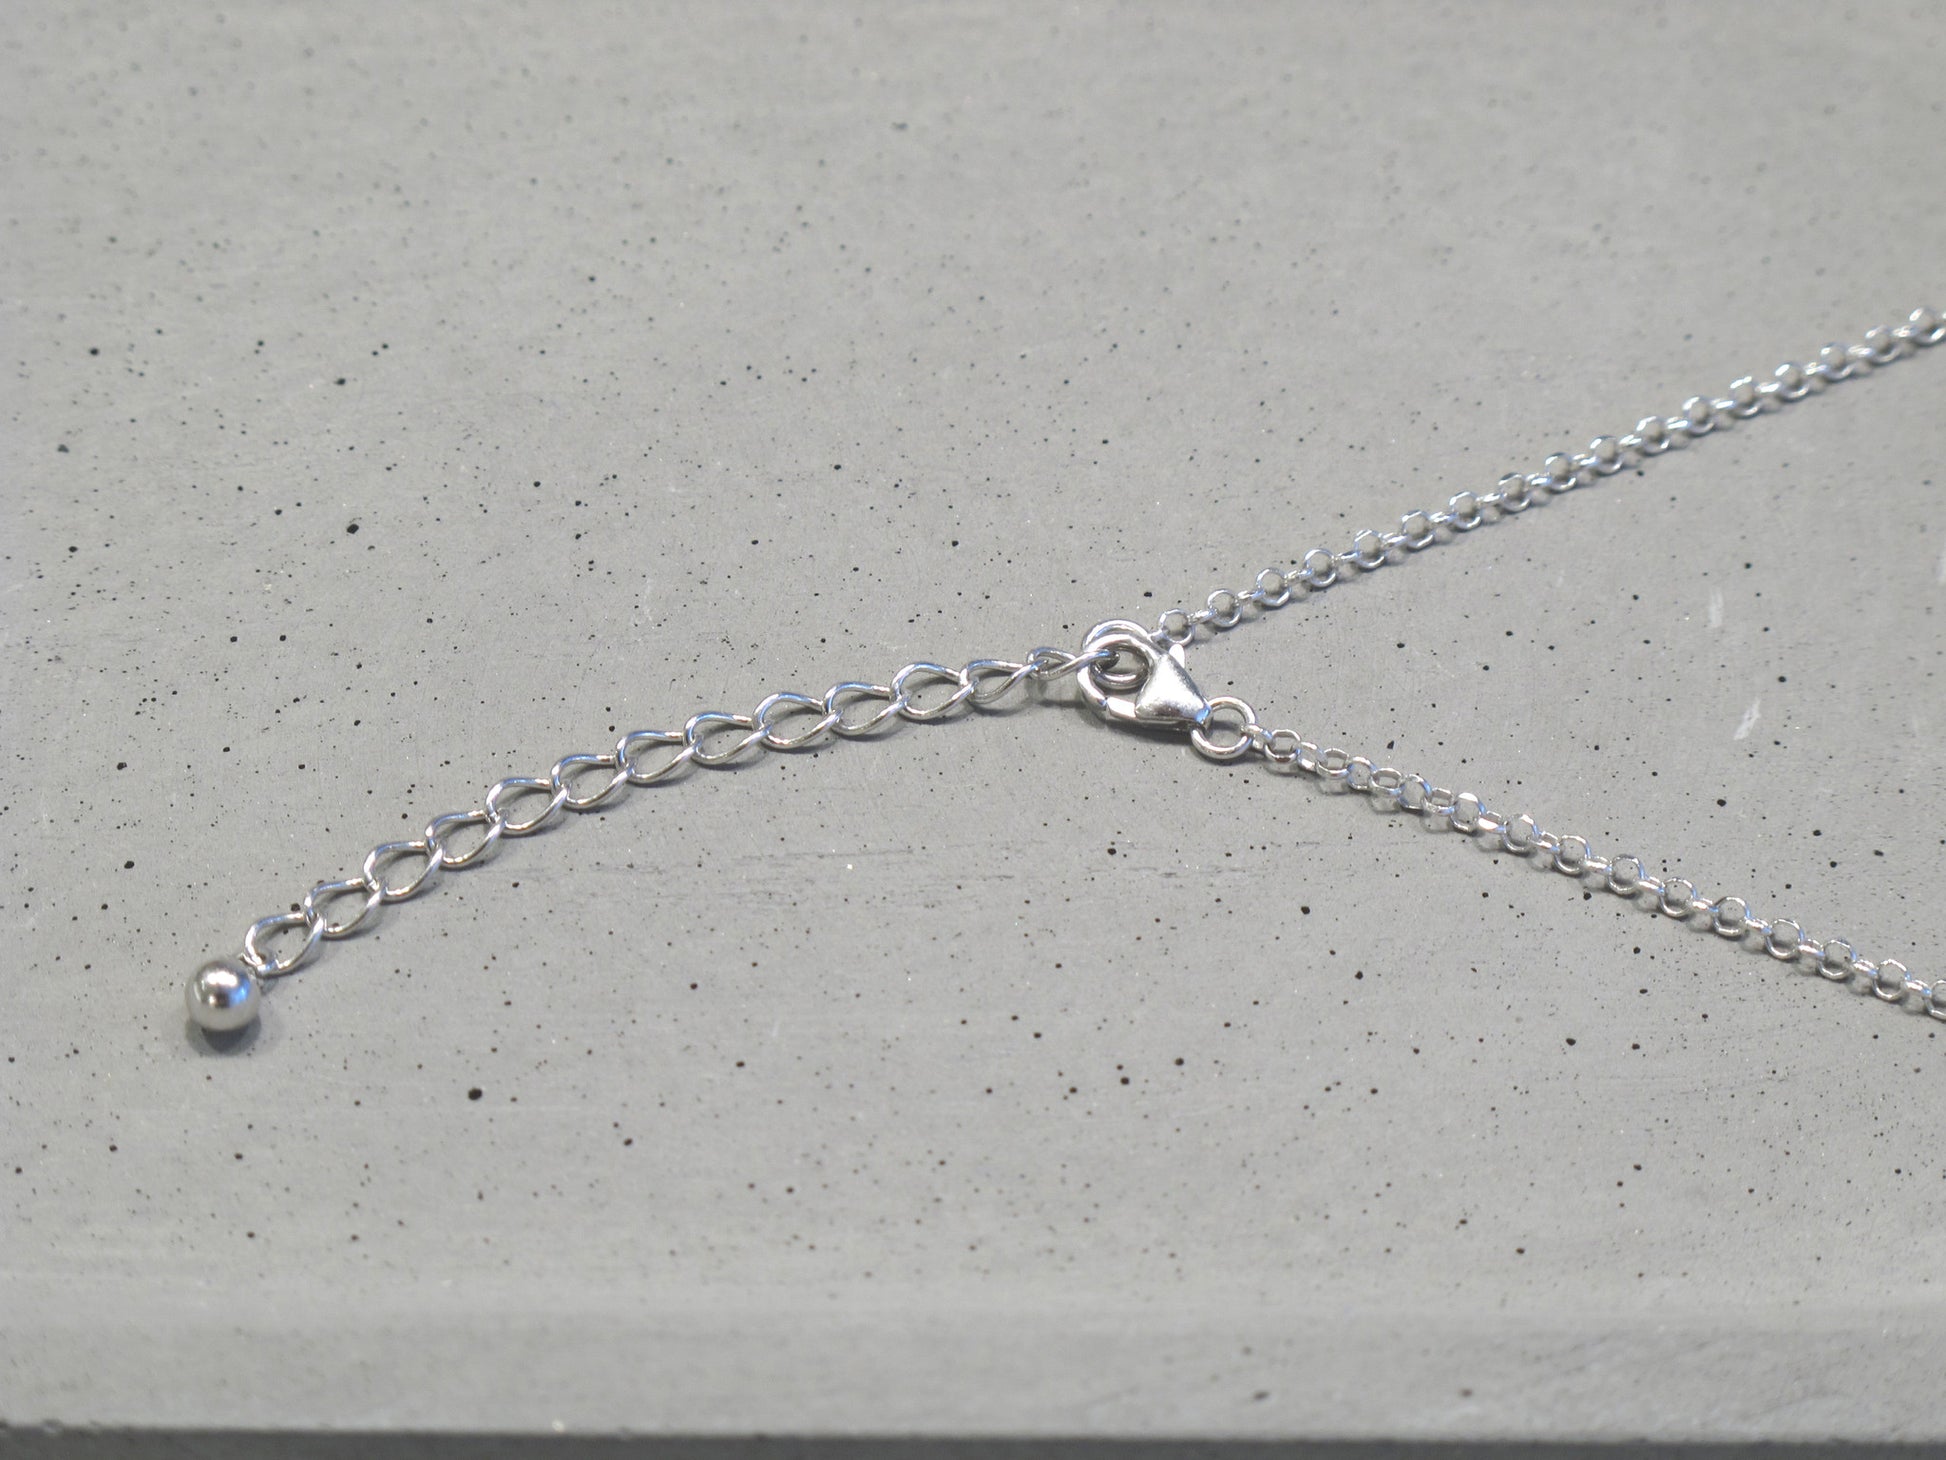 Minimal sterling silver necklace with Marbling concrete beads (Spheres)